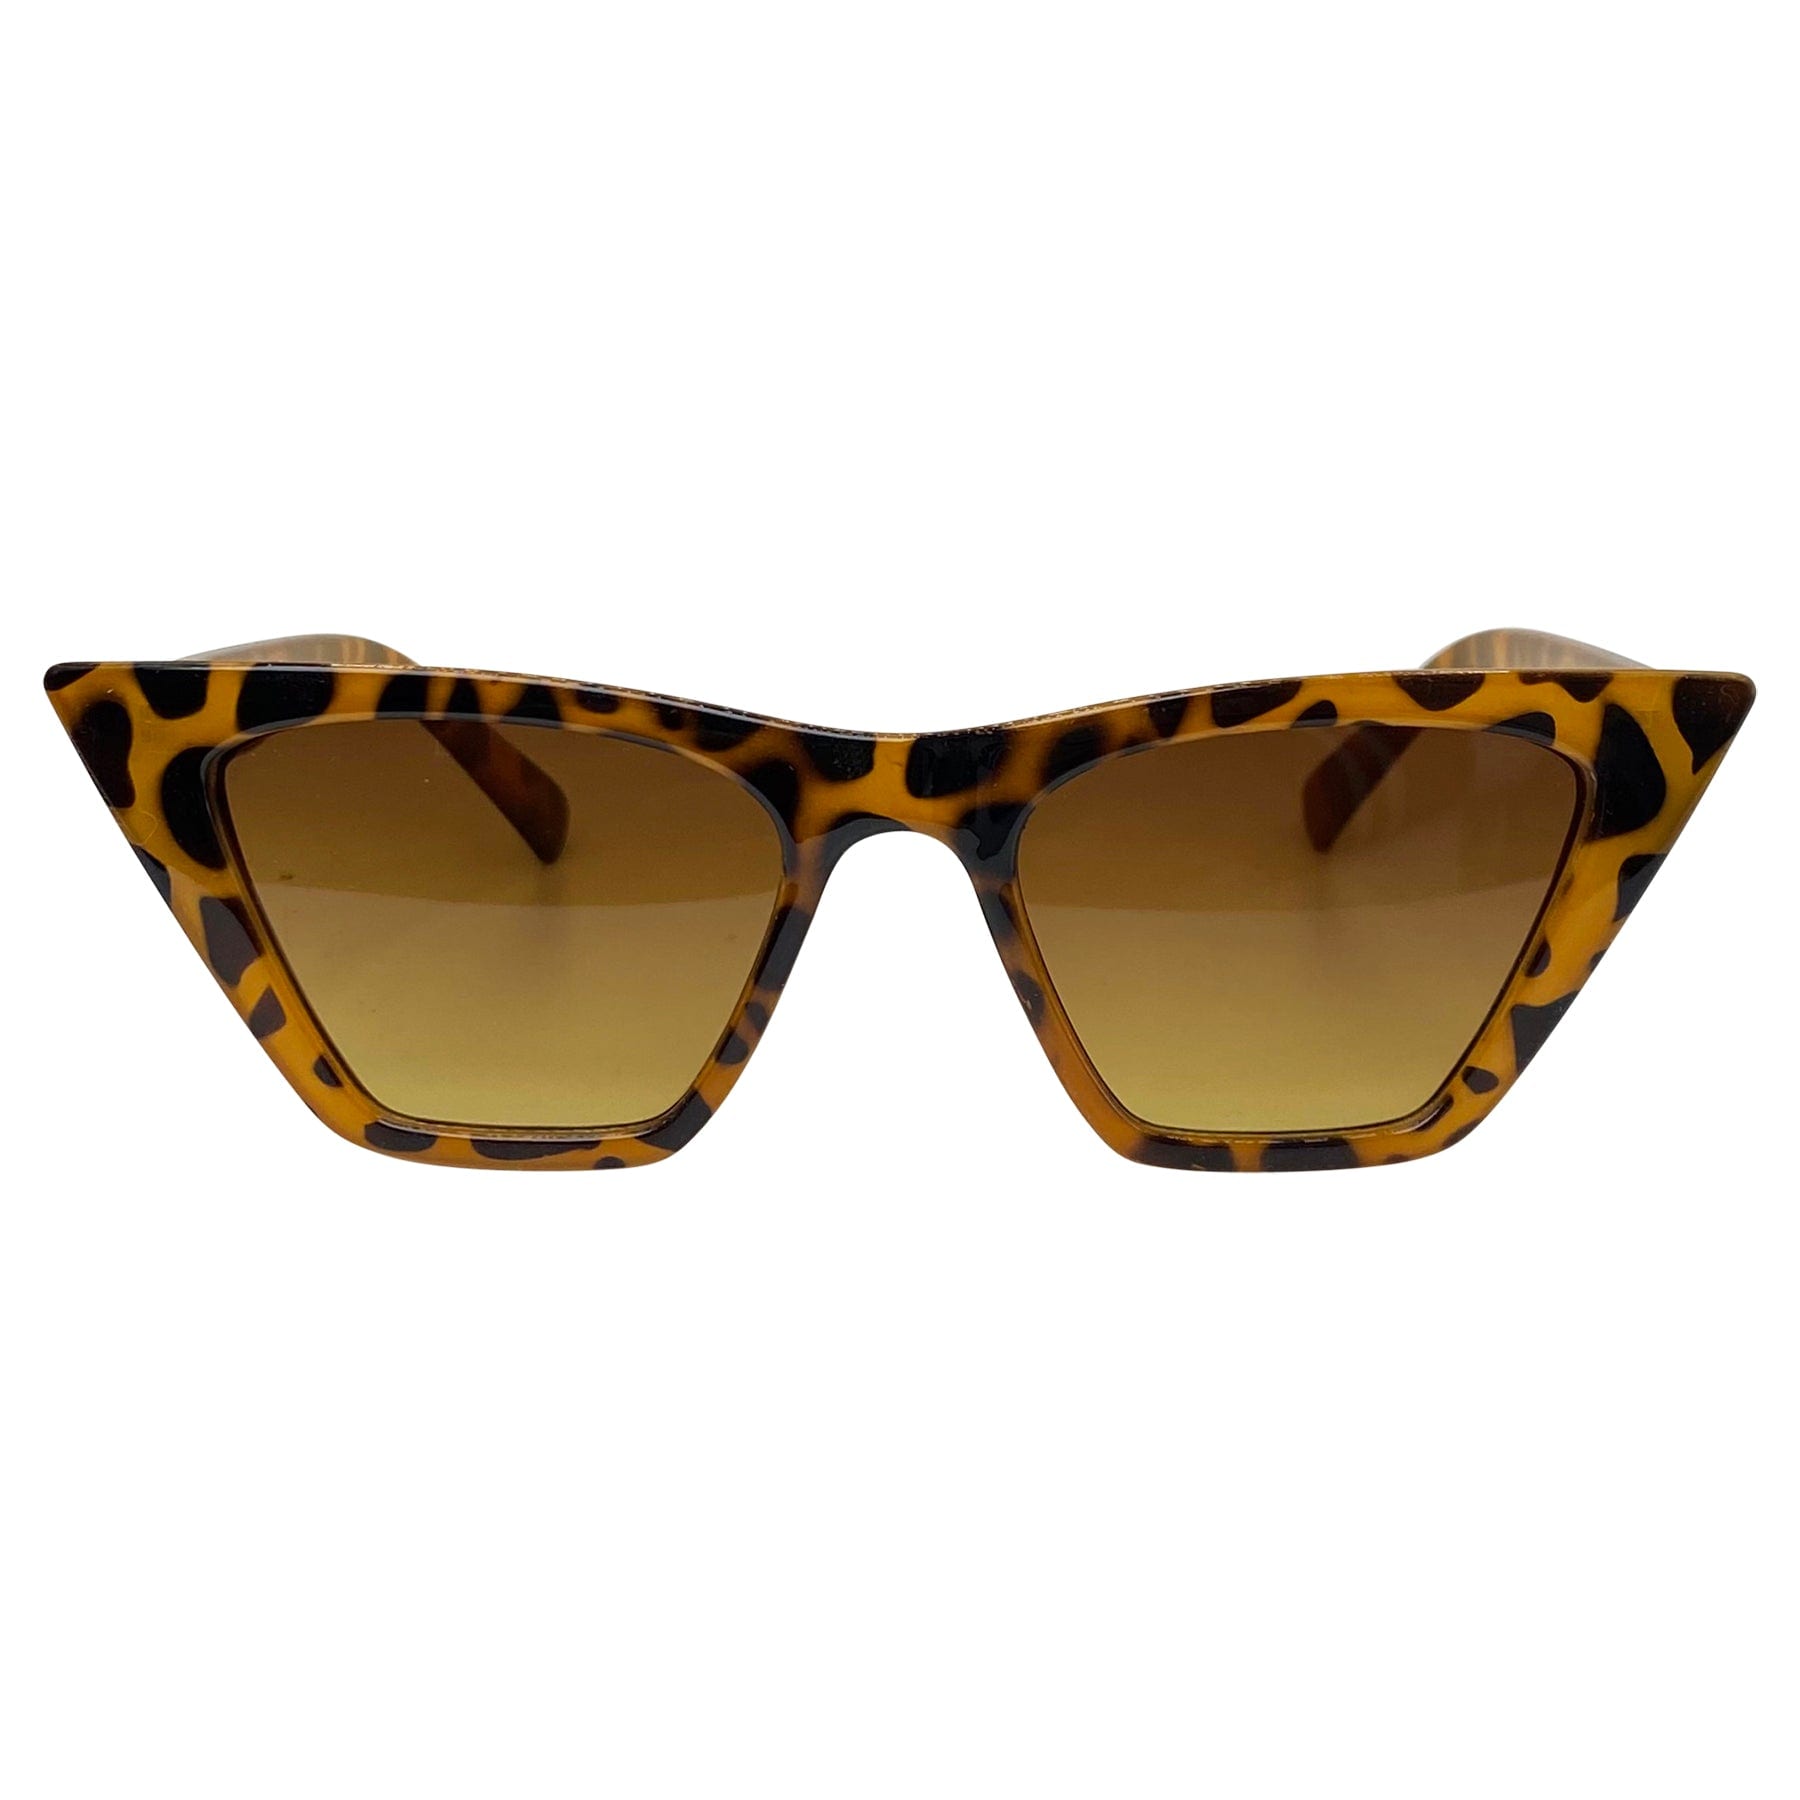 pointed angled cat eye vintage sunglasses with a unique animal print frame